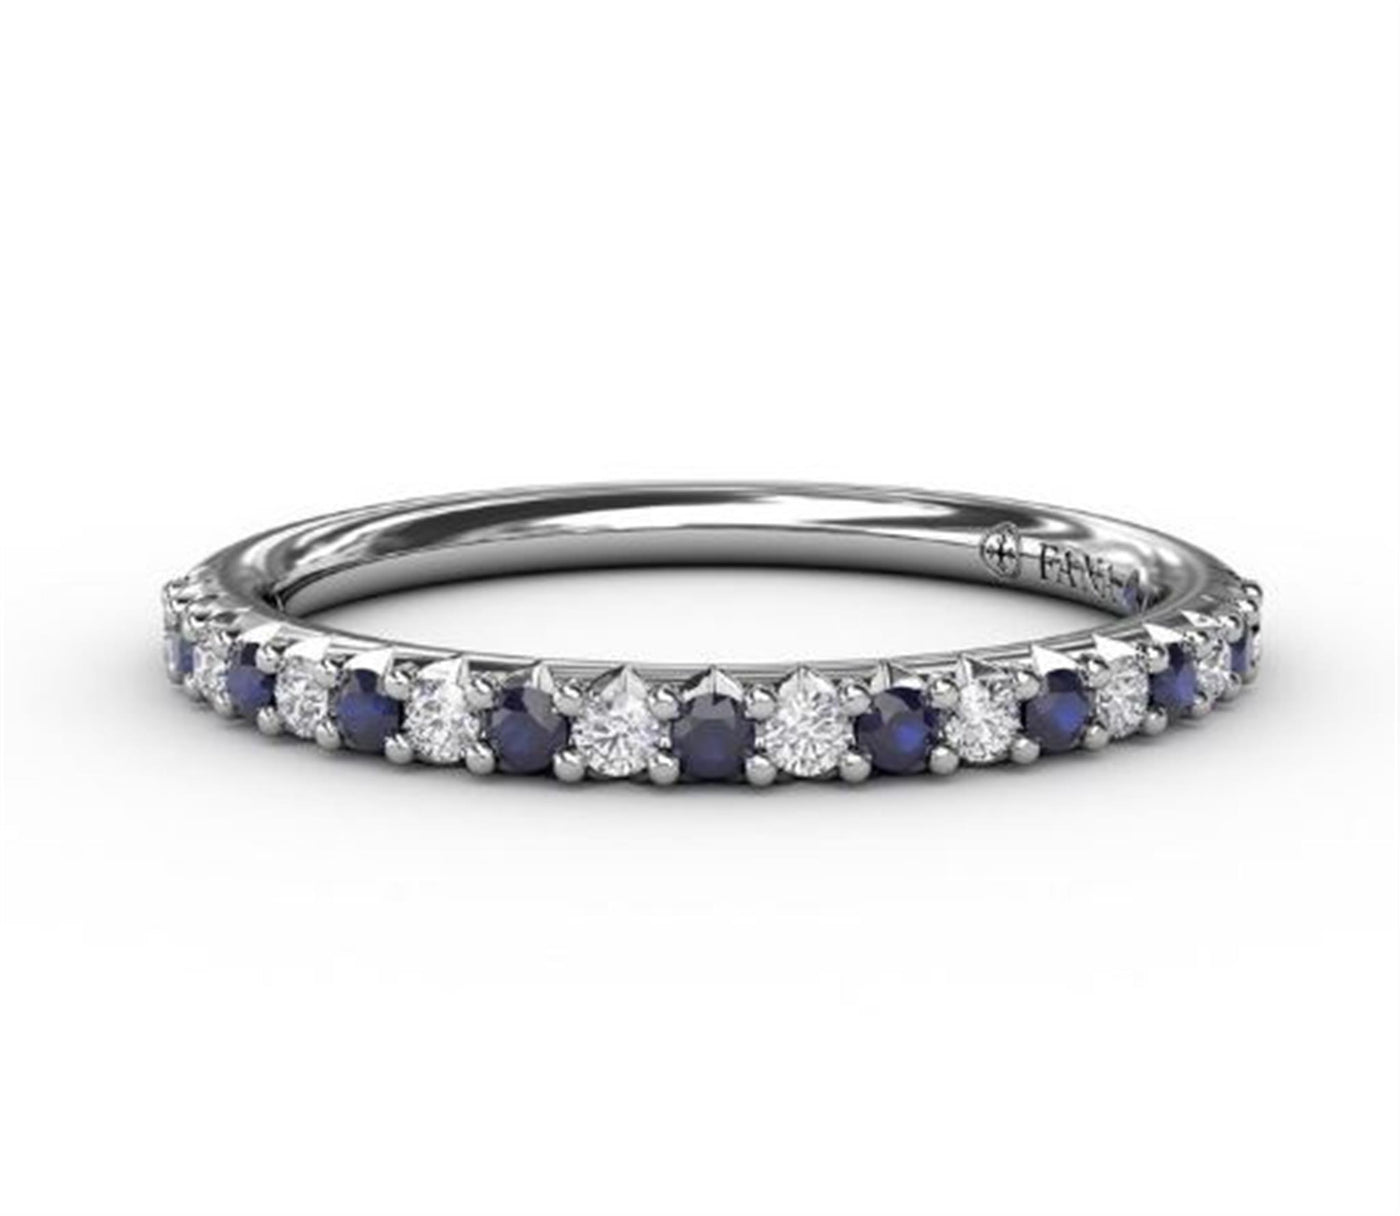 Fana 14K White Gold 0.32ctw Band Style Ring with Diamonds and Sapphires